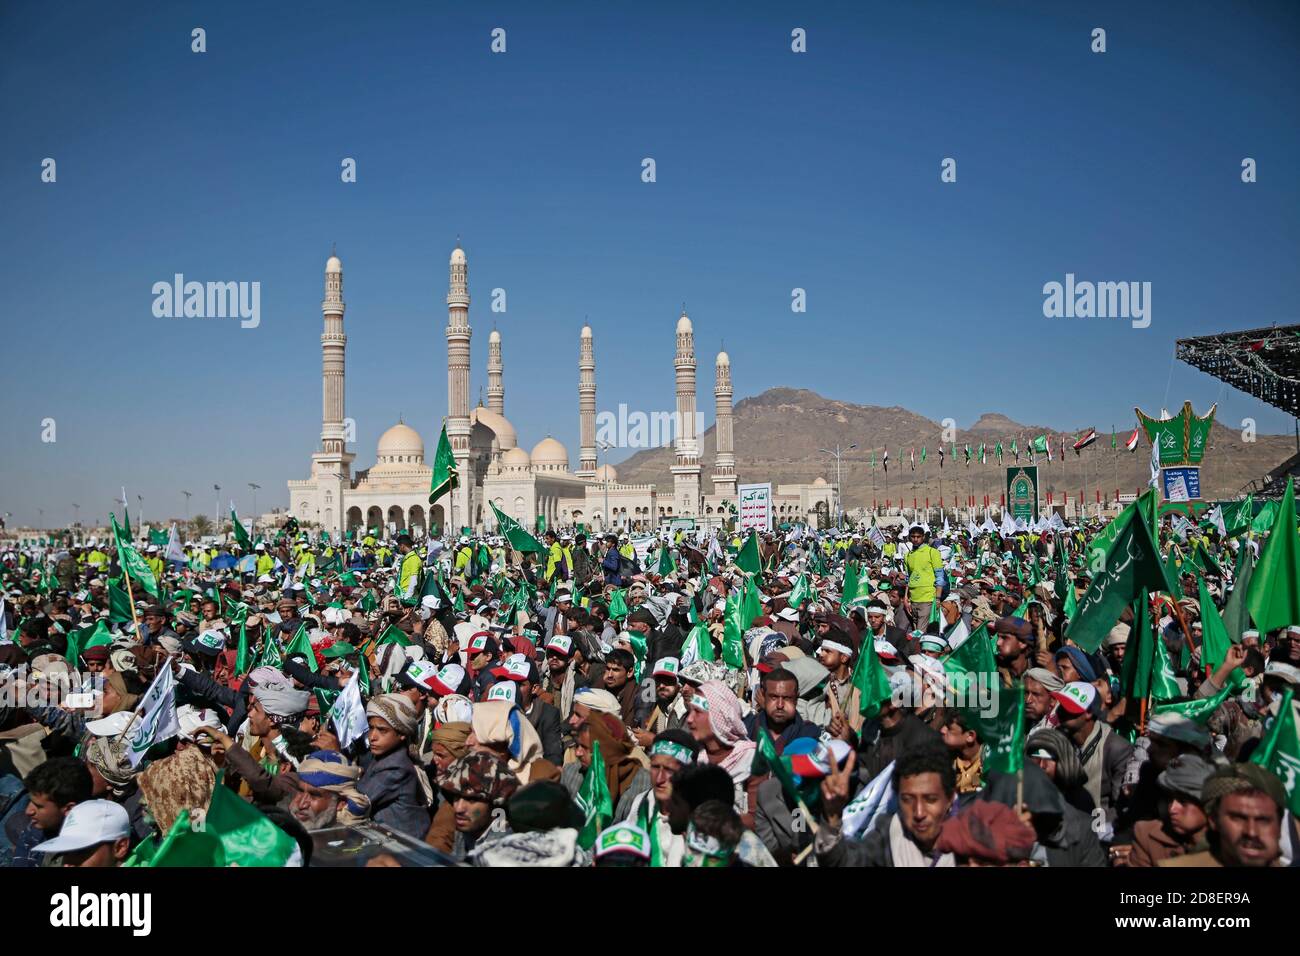 Sanaa, Yemen. 29th Oct, 2020. Houthi rebels and their supporters gather outside Al Saleh Mosque during a celebration marking the anniversary of the birth of Islam's Prophet Muhammad (Mawlid al-Nabi) in Sanaa. Credit: Hani Al-Ansi/dpa/Alamy Live News Stock Photo